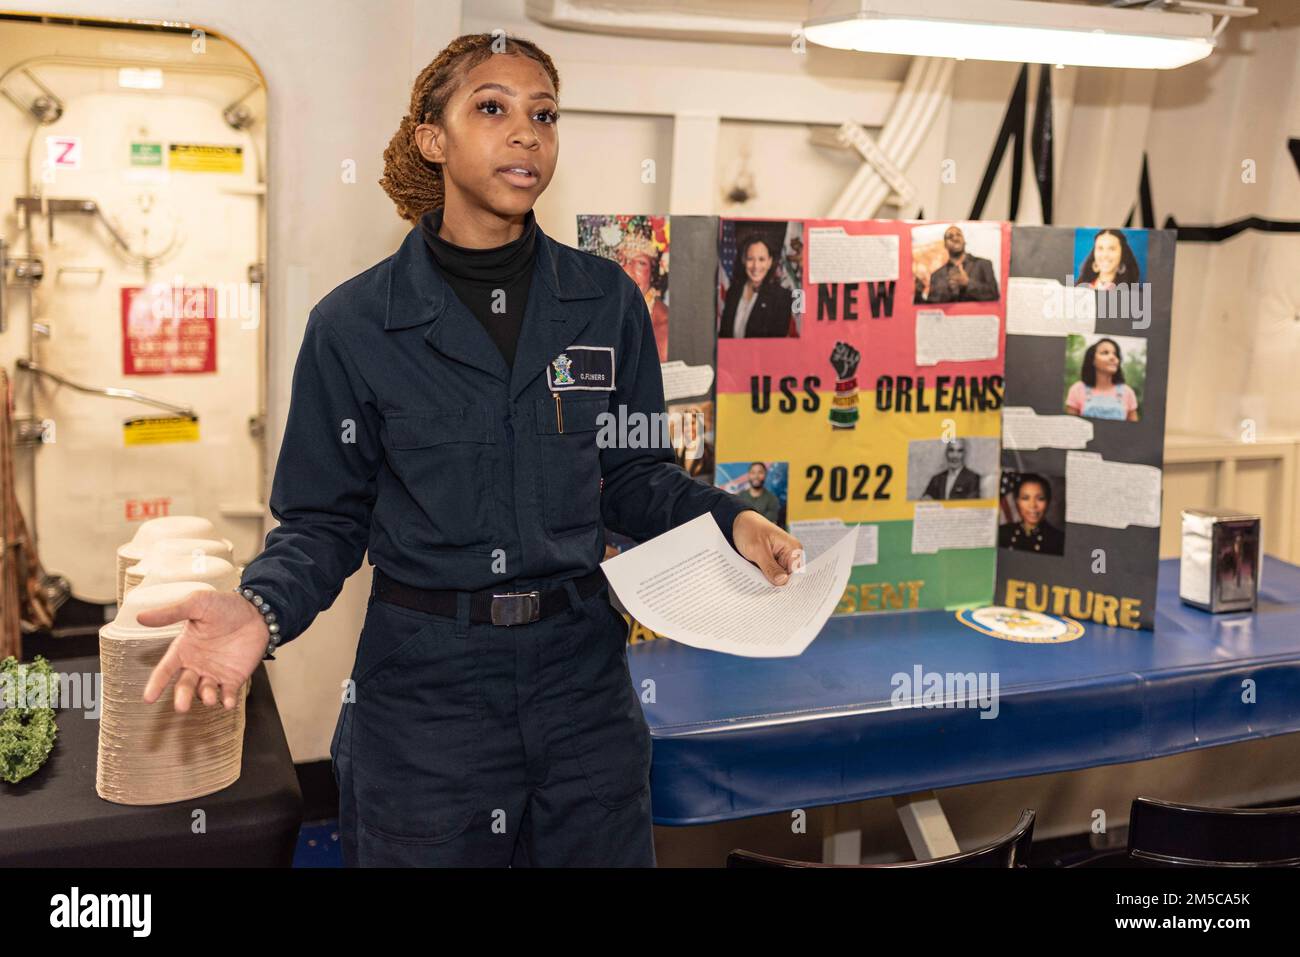 220228-N-XB010-1014 EAST CHINA SEA (Feb. 28, 2022) Logistics Specialist Seaman Cicely Flowers presents a speech during a Black History Month presentation by USS New Orleans’ (LPD 18) Diversity Committee. New Orleans, part of the America Amphibious Ready Group, along with the 31st Marine Expeditionary Unit, is operating in the U.S. 7th Fleet area of responsibility to enhance interoperability with allies and partners and serve as a ready response force to defend peace and stability in the Indo-Pacific region. Stock Photo